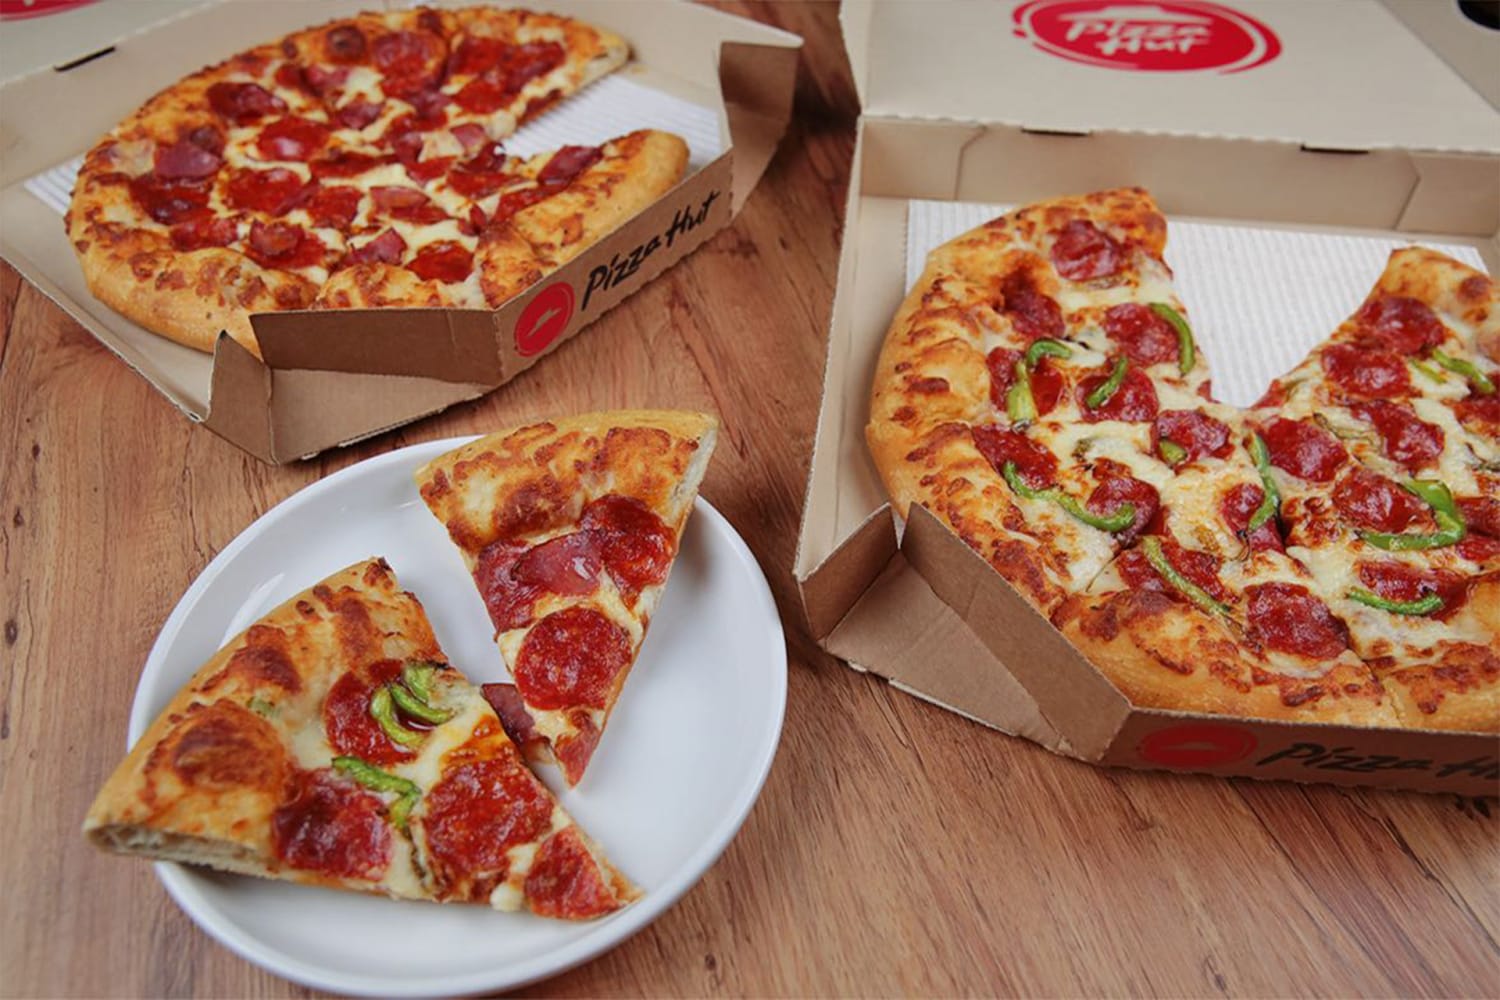 Pizza Hut Promises Free Pizza For America If This Super Bowl Record Is Broken